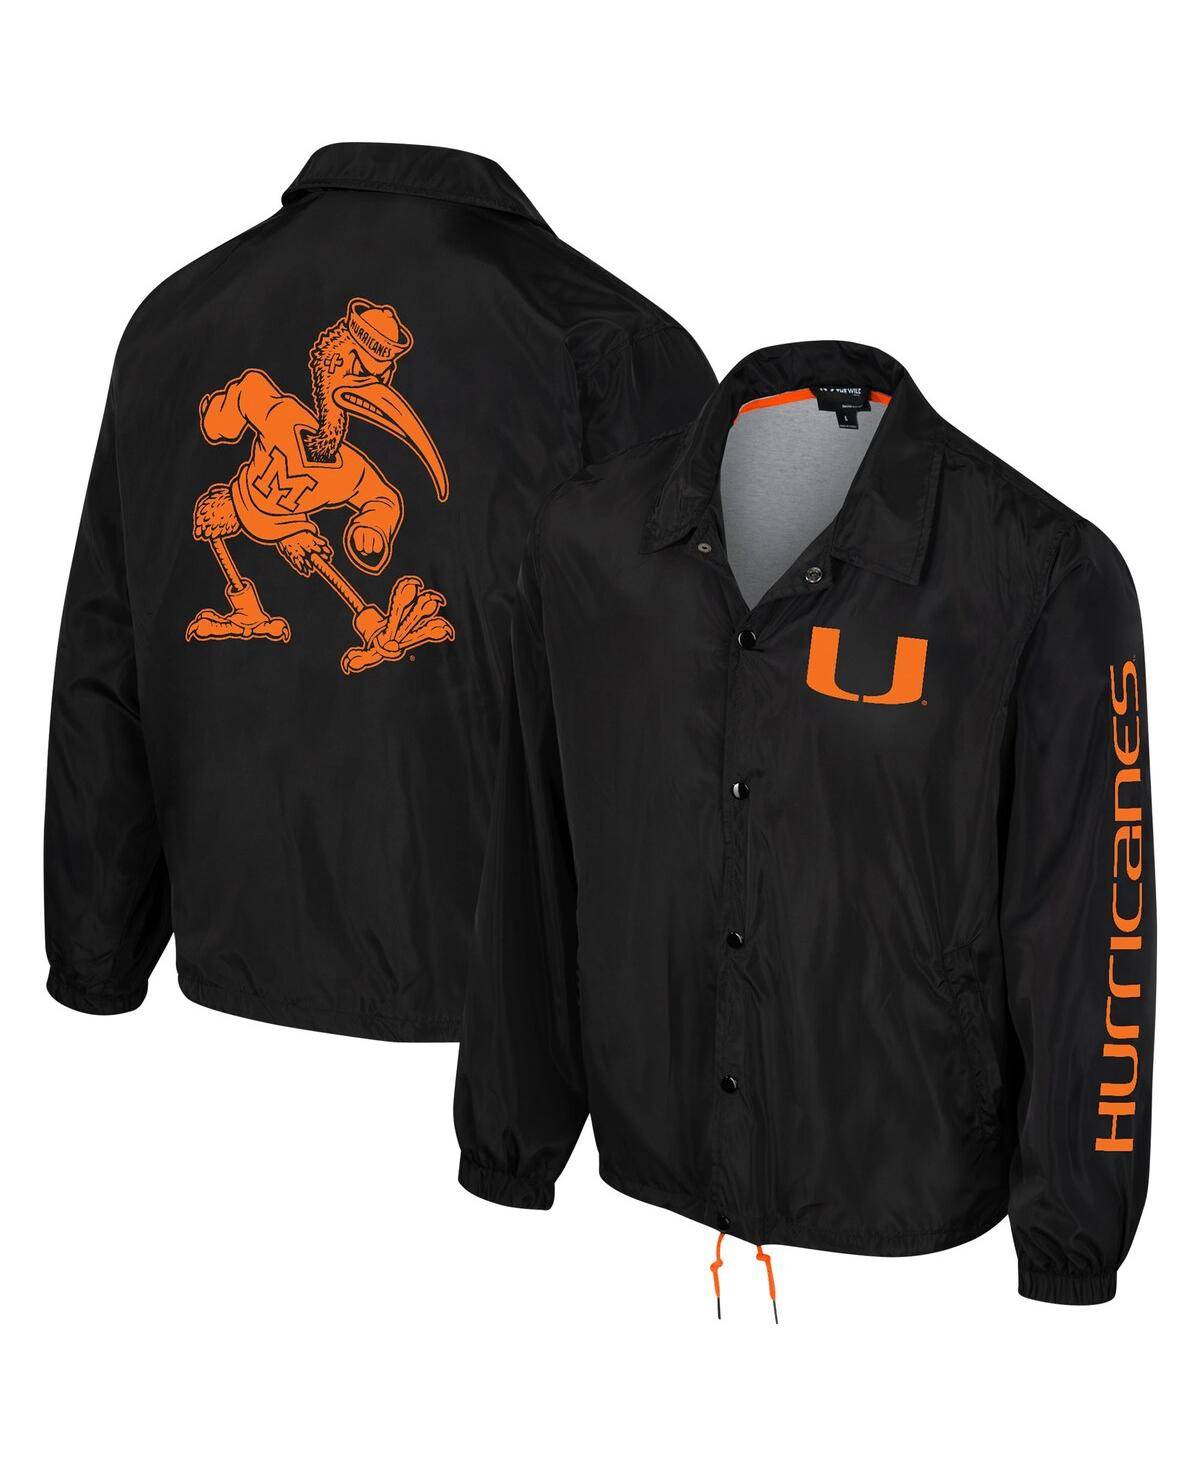 Men's and Women's The Wild Collective Black Miami Hurricanes Coaches Full-Snap Jacket - Black